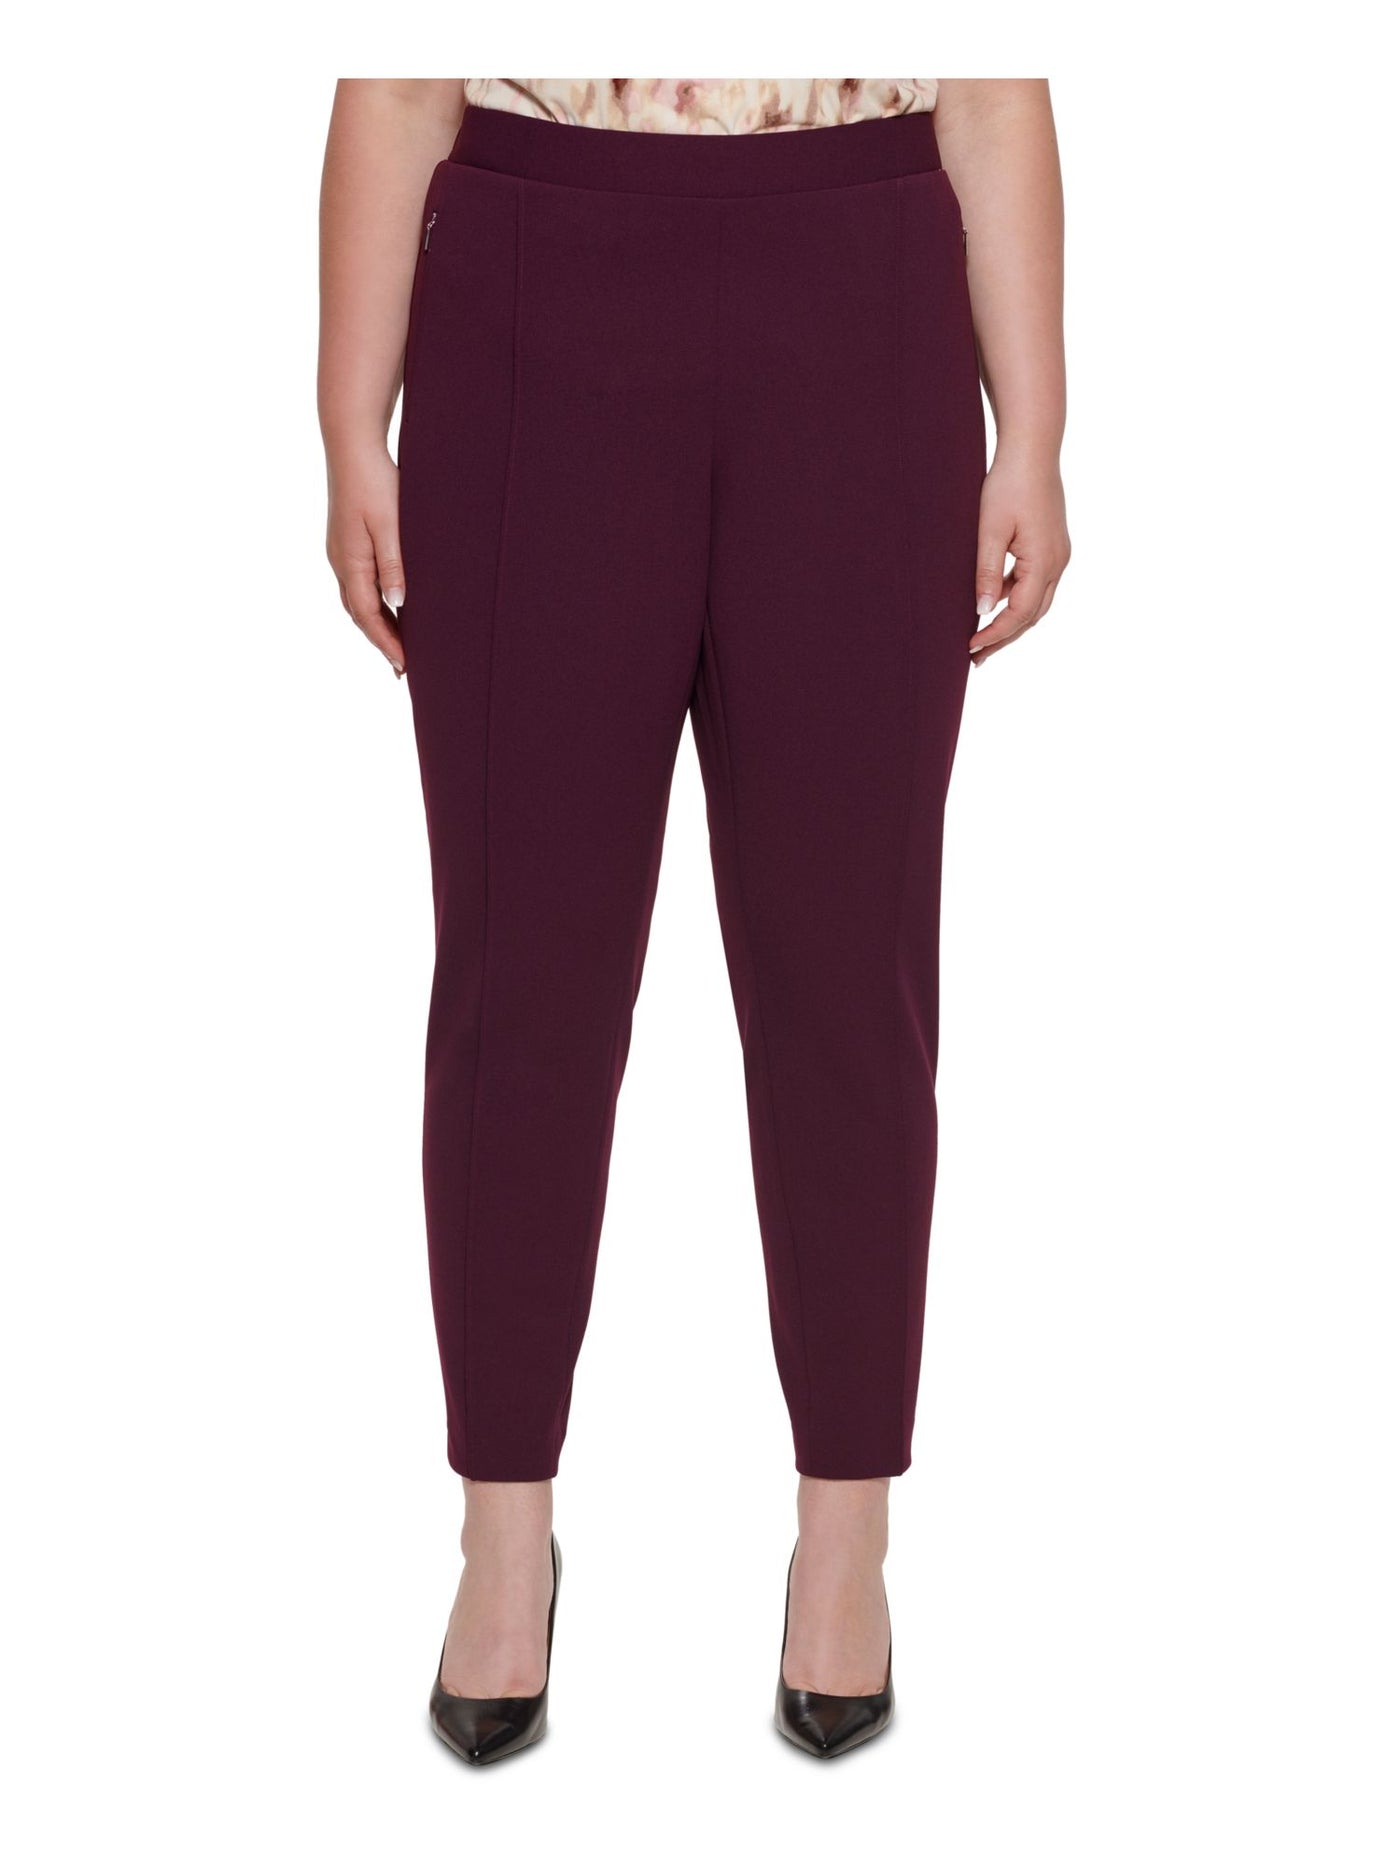 CALVIN KLEIN Womens Purple Stretch Pocketed Mid-rise Pull-on Style Wear To Work Straight leg Pants Plus 20W